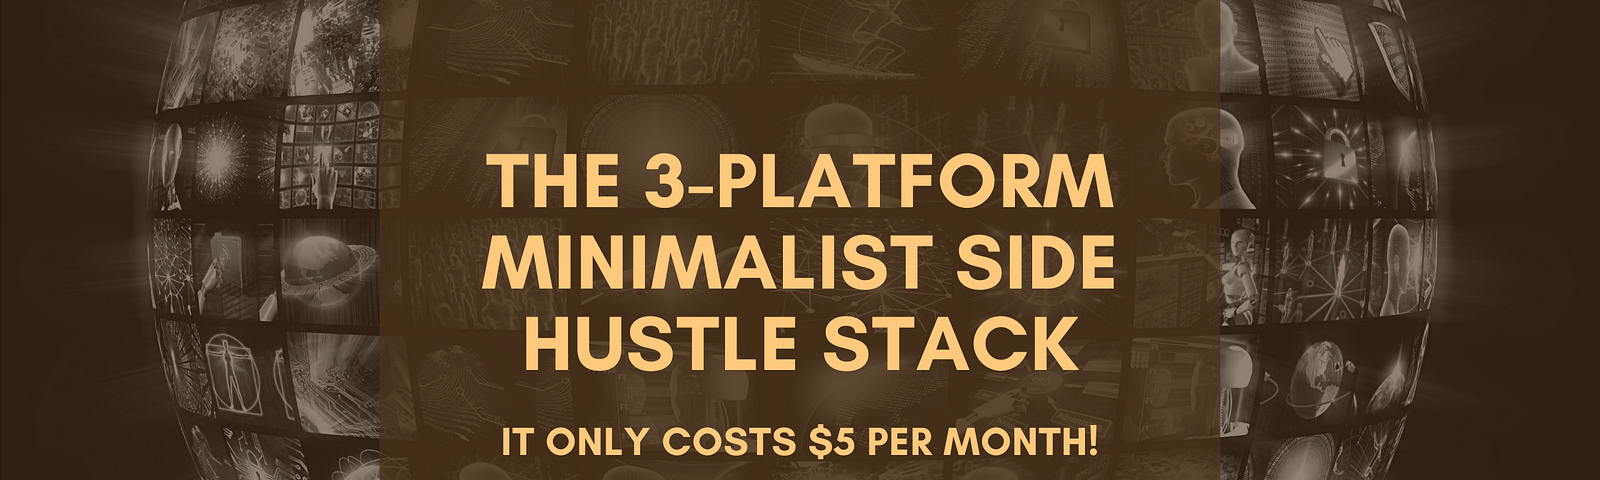 The 3-Platform Minimalist Side Hustle Stack That Only Costs $5 A Month